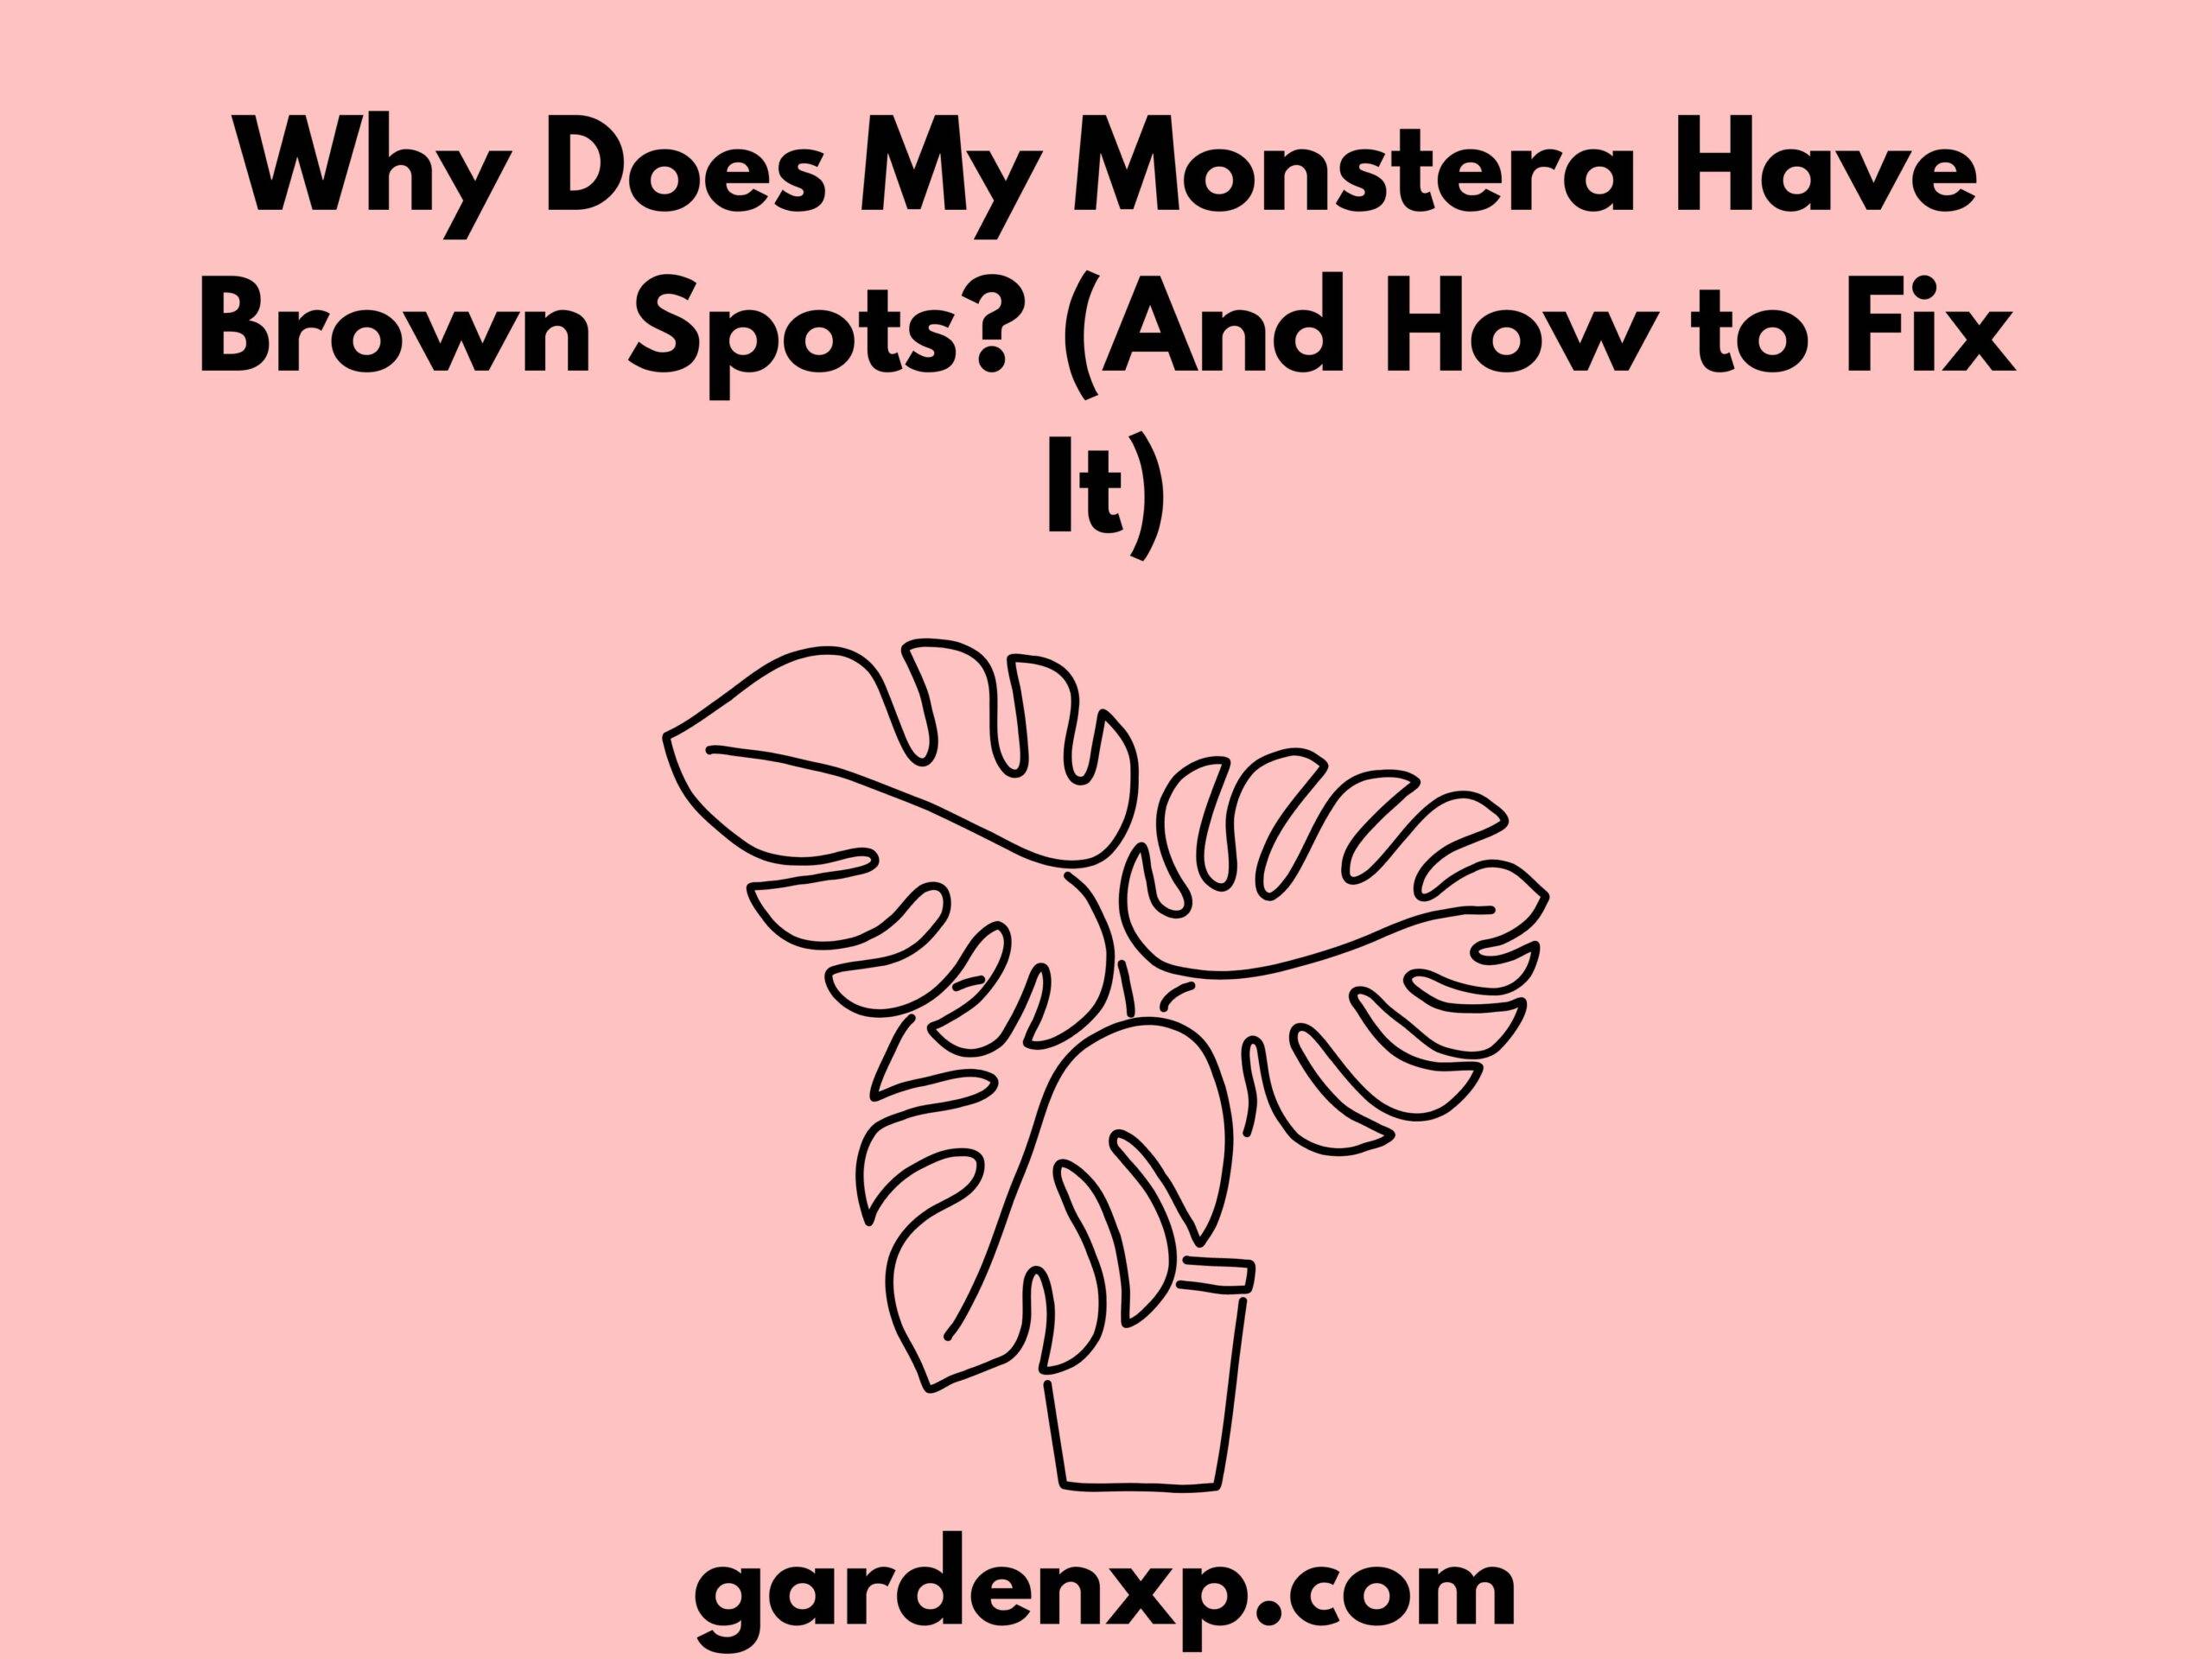 Why Does My Monstera Have Brown Spots? (And How to Fix It)